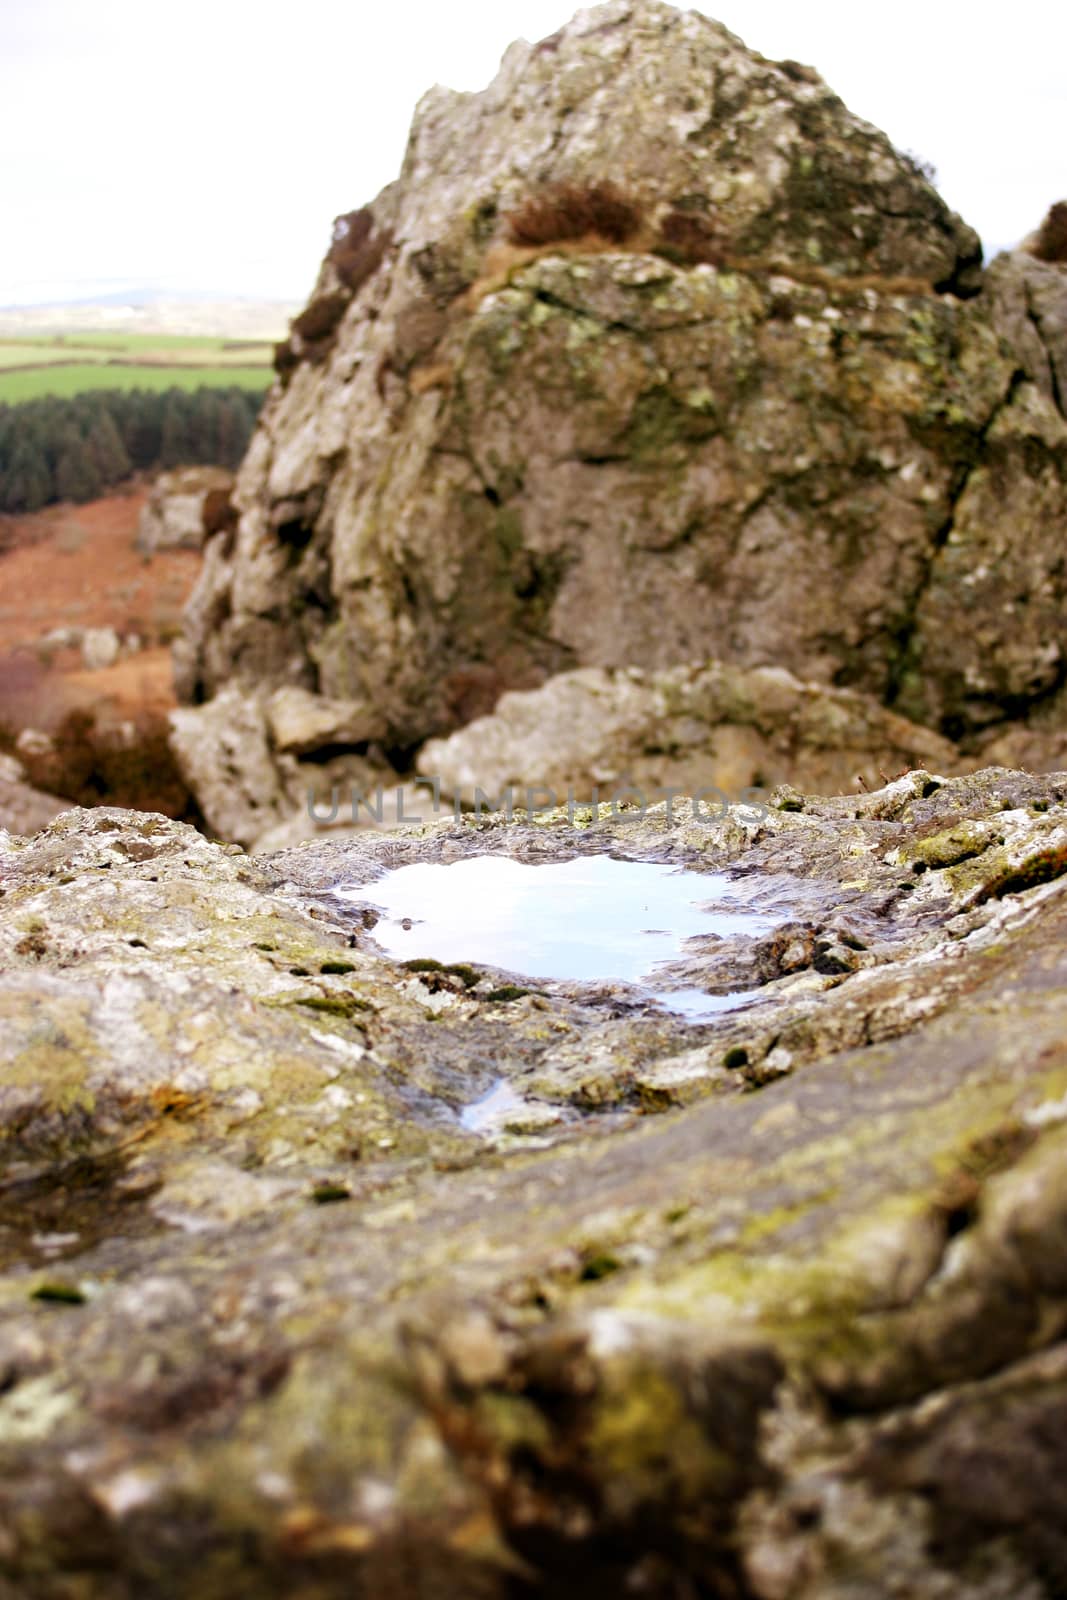 A pool of water found at the top of the Presili mountain in Wales